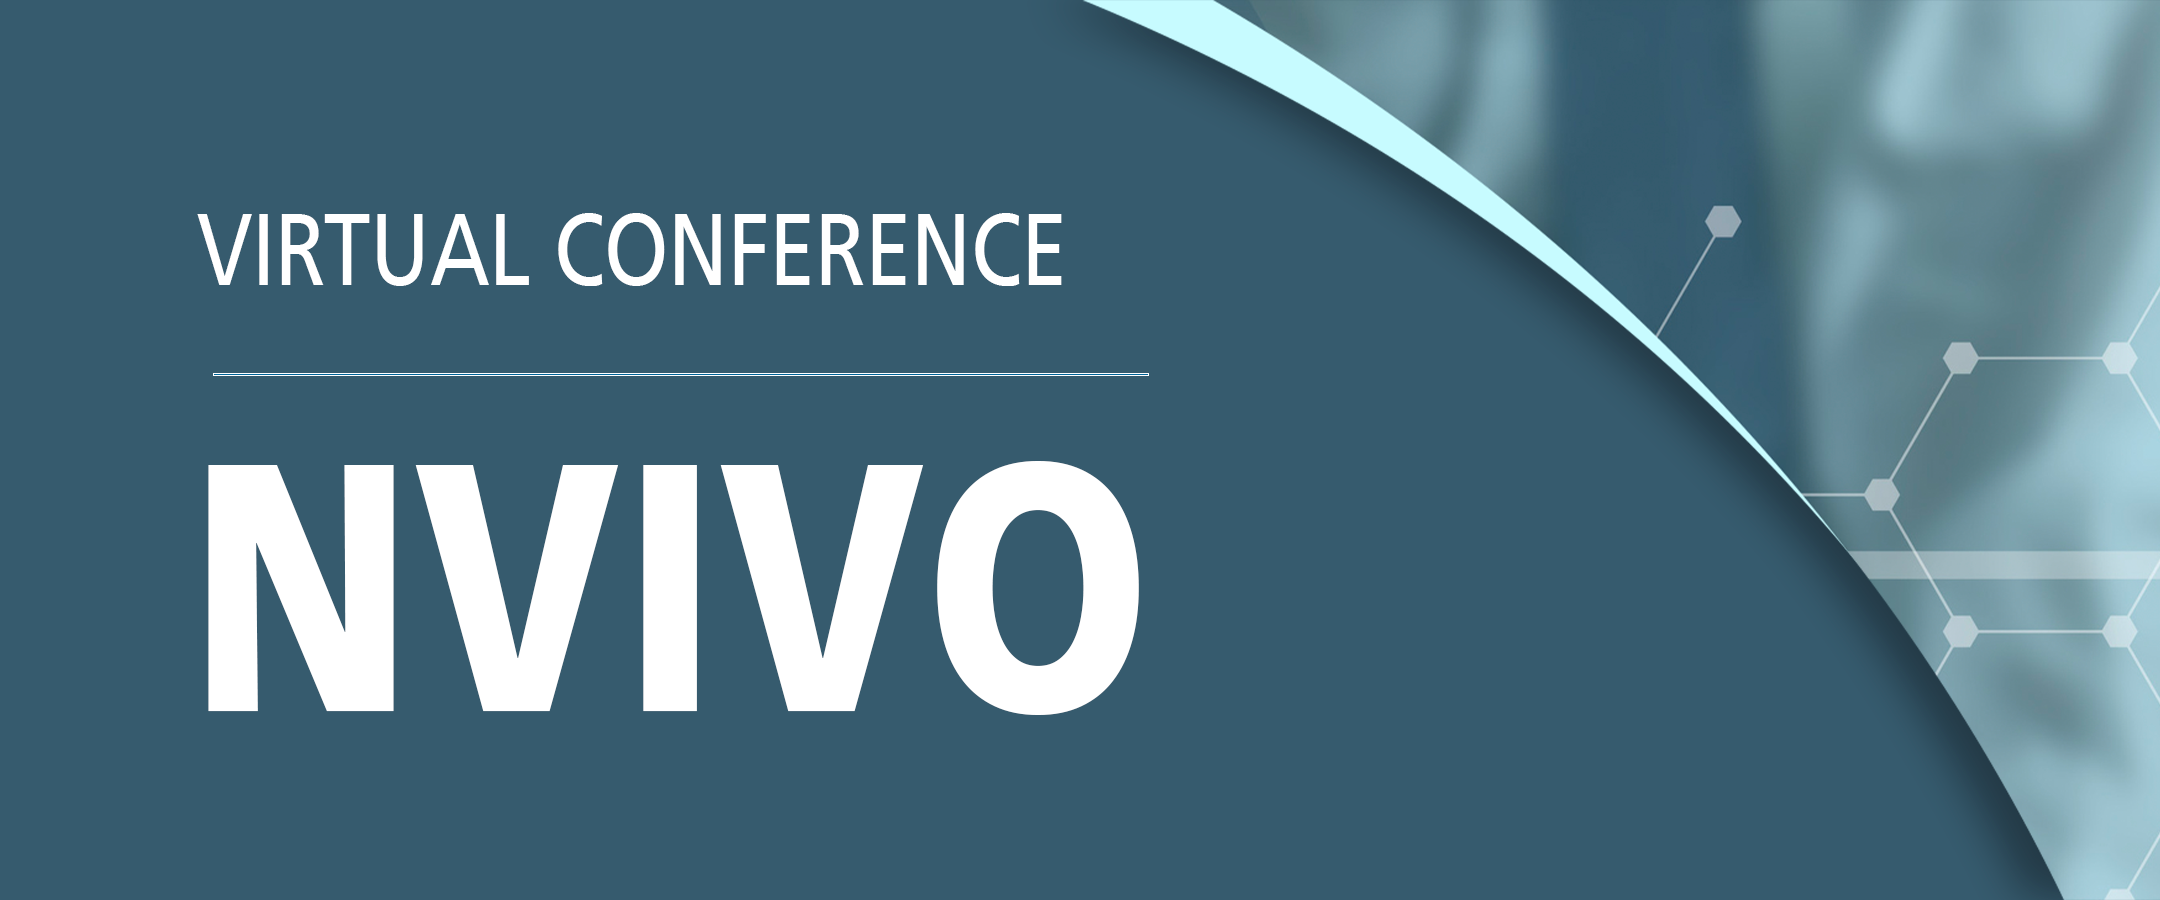 NVivo Virtual Conference – Qualitative Research in a Changing World